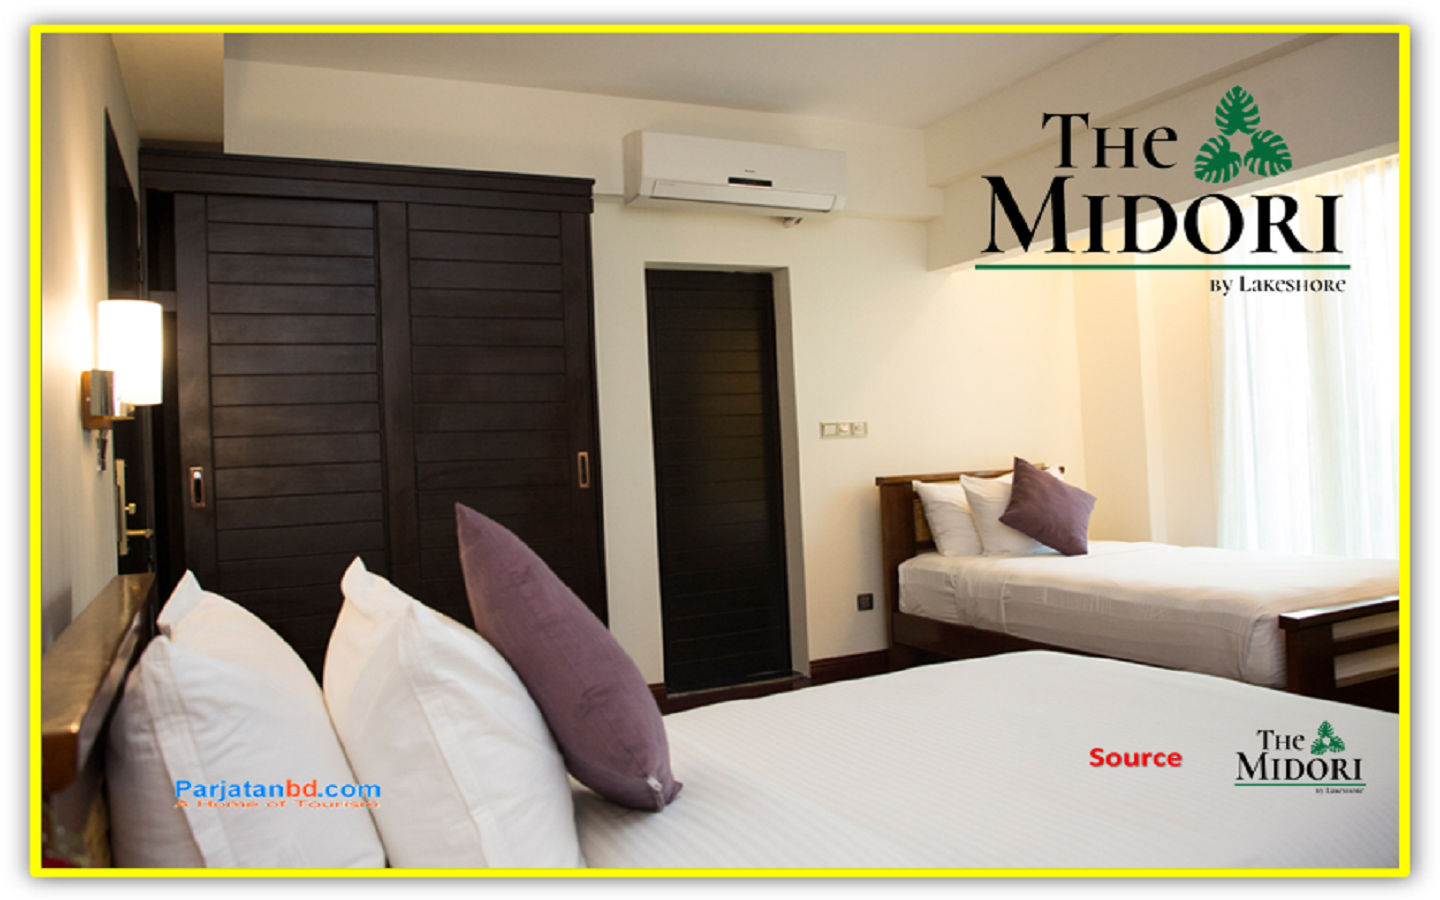 Room Family Suite -1, The Midori by Lakeshore, Gulshan 2